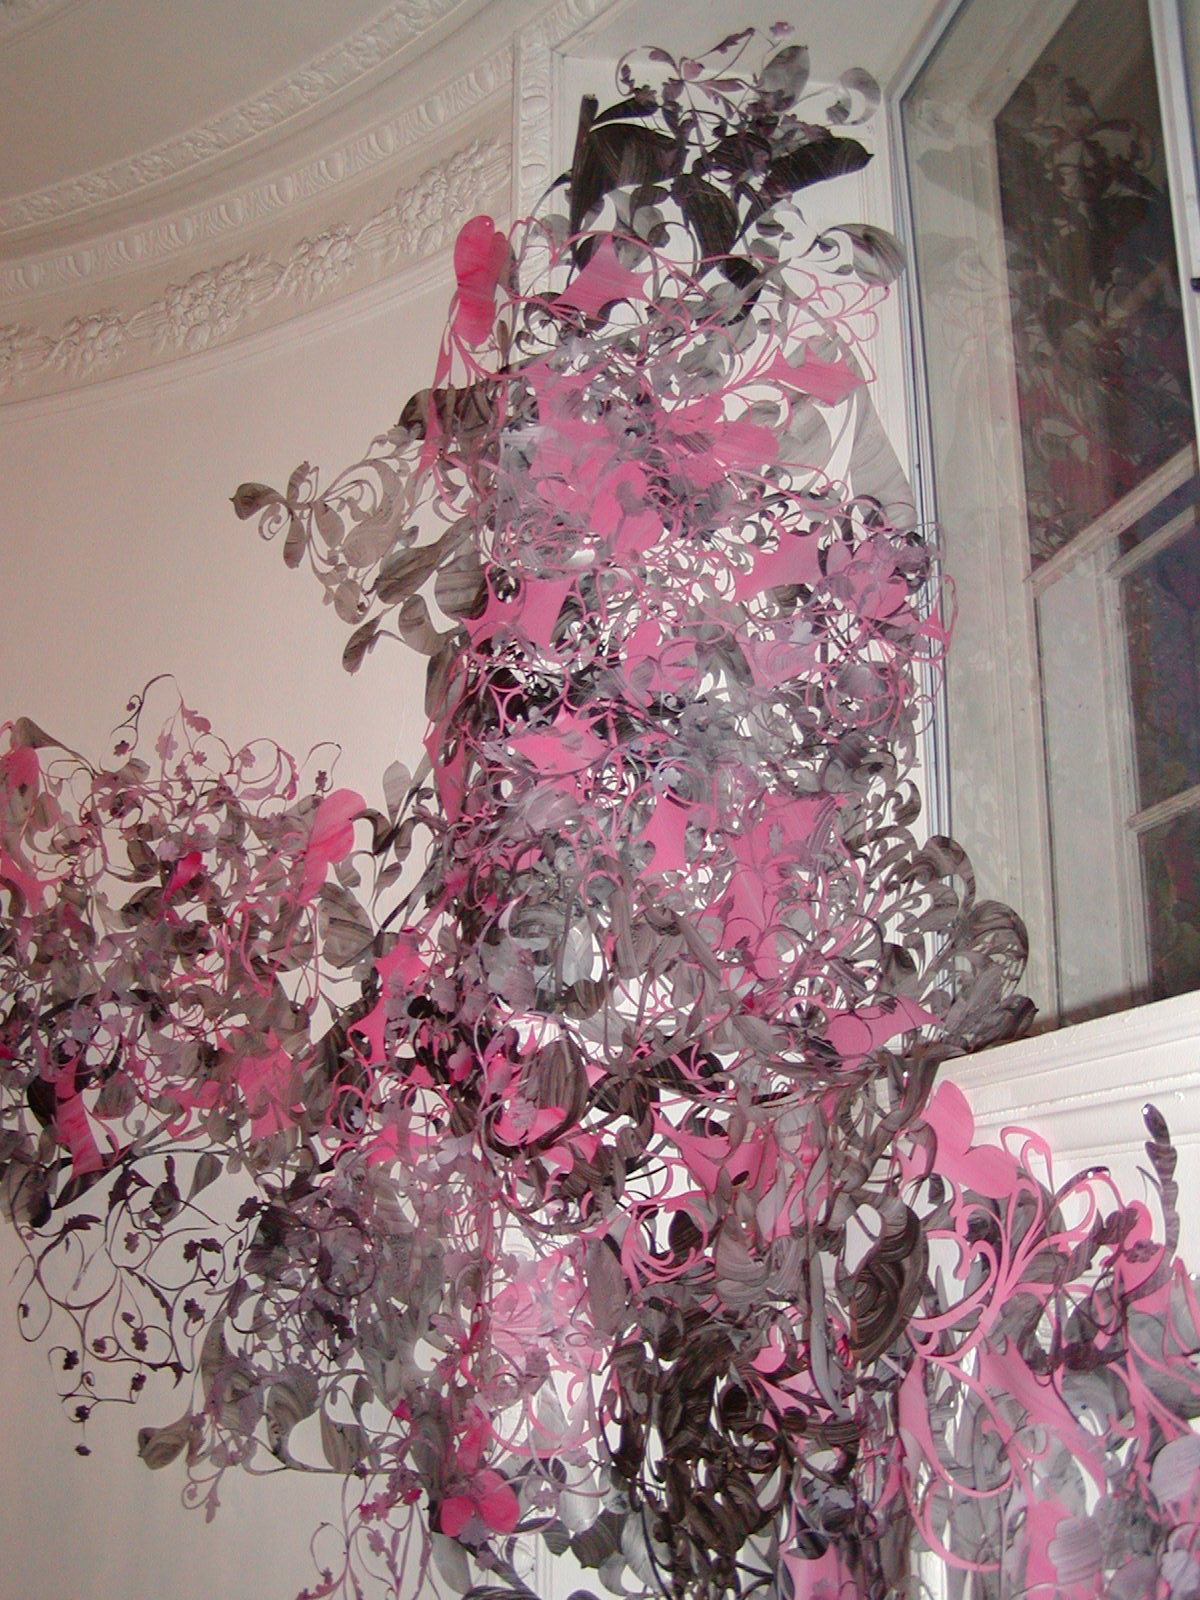   Out of the Woodwork,  dimensions variable, acrylic on cut vellum, Evanston Art Museum Biennial, 2006.&nbsp; 